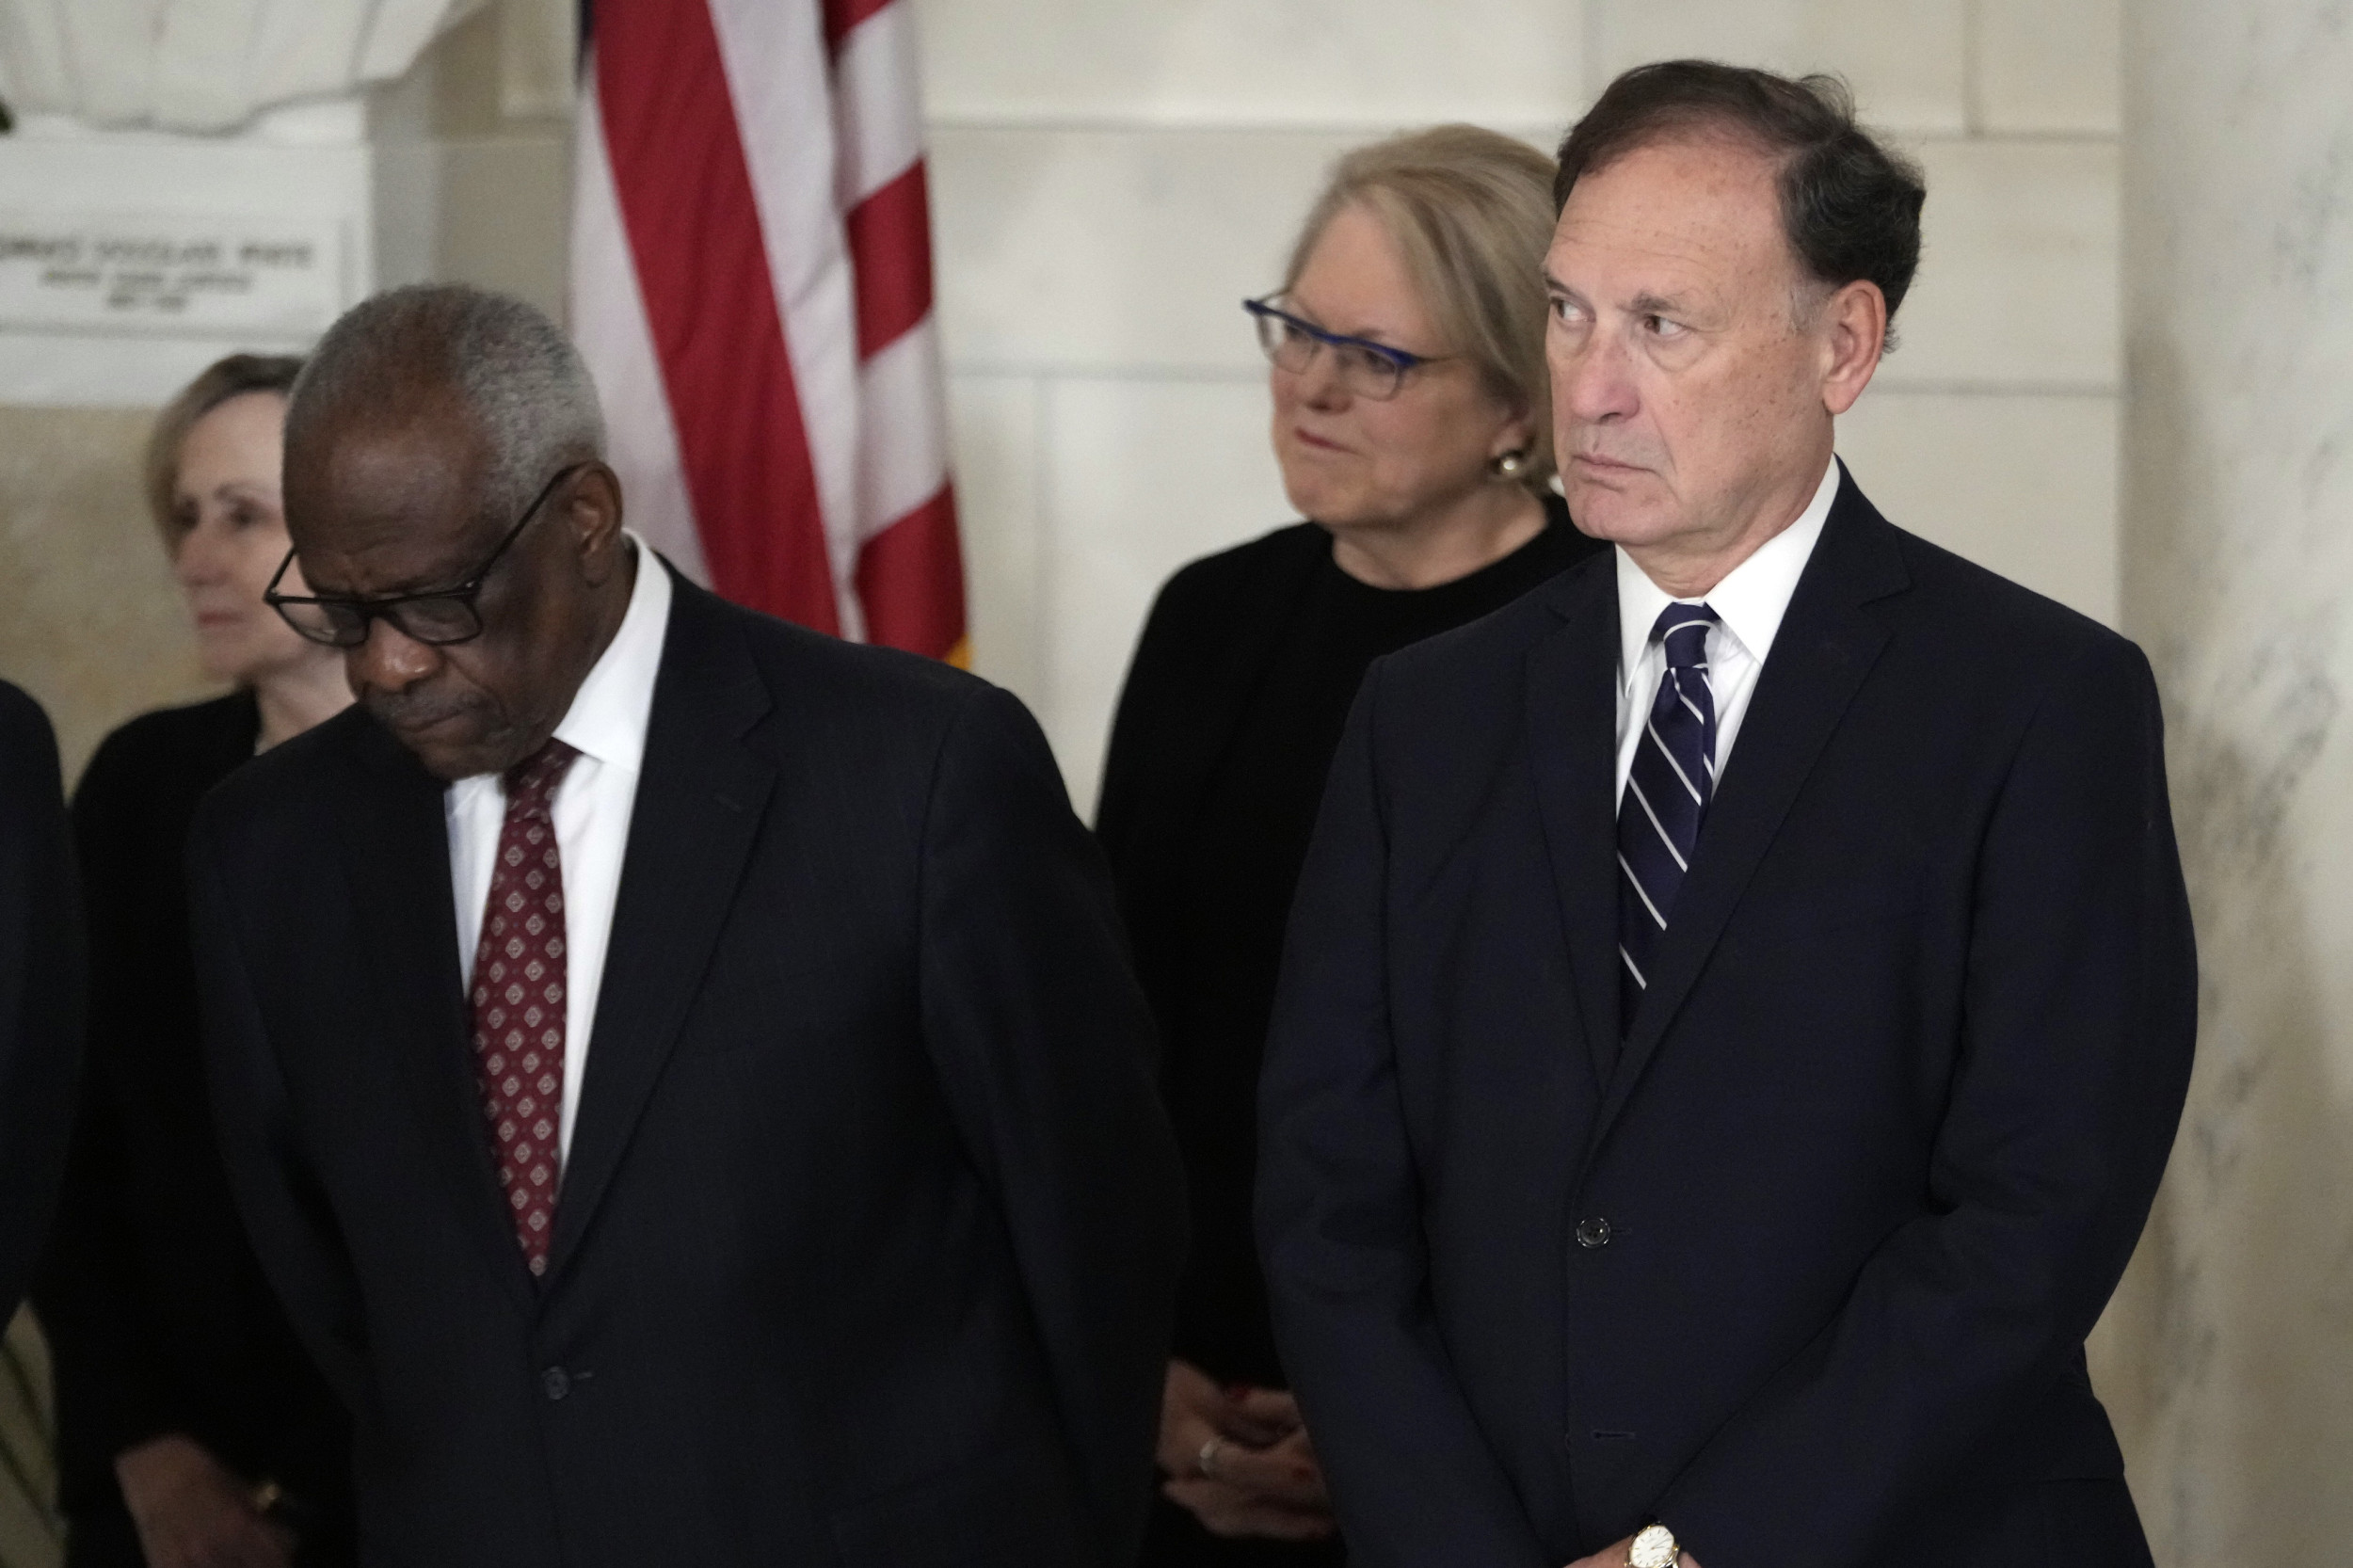 thousands sign christian petition rebuking clarence thomas and samuel alito